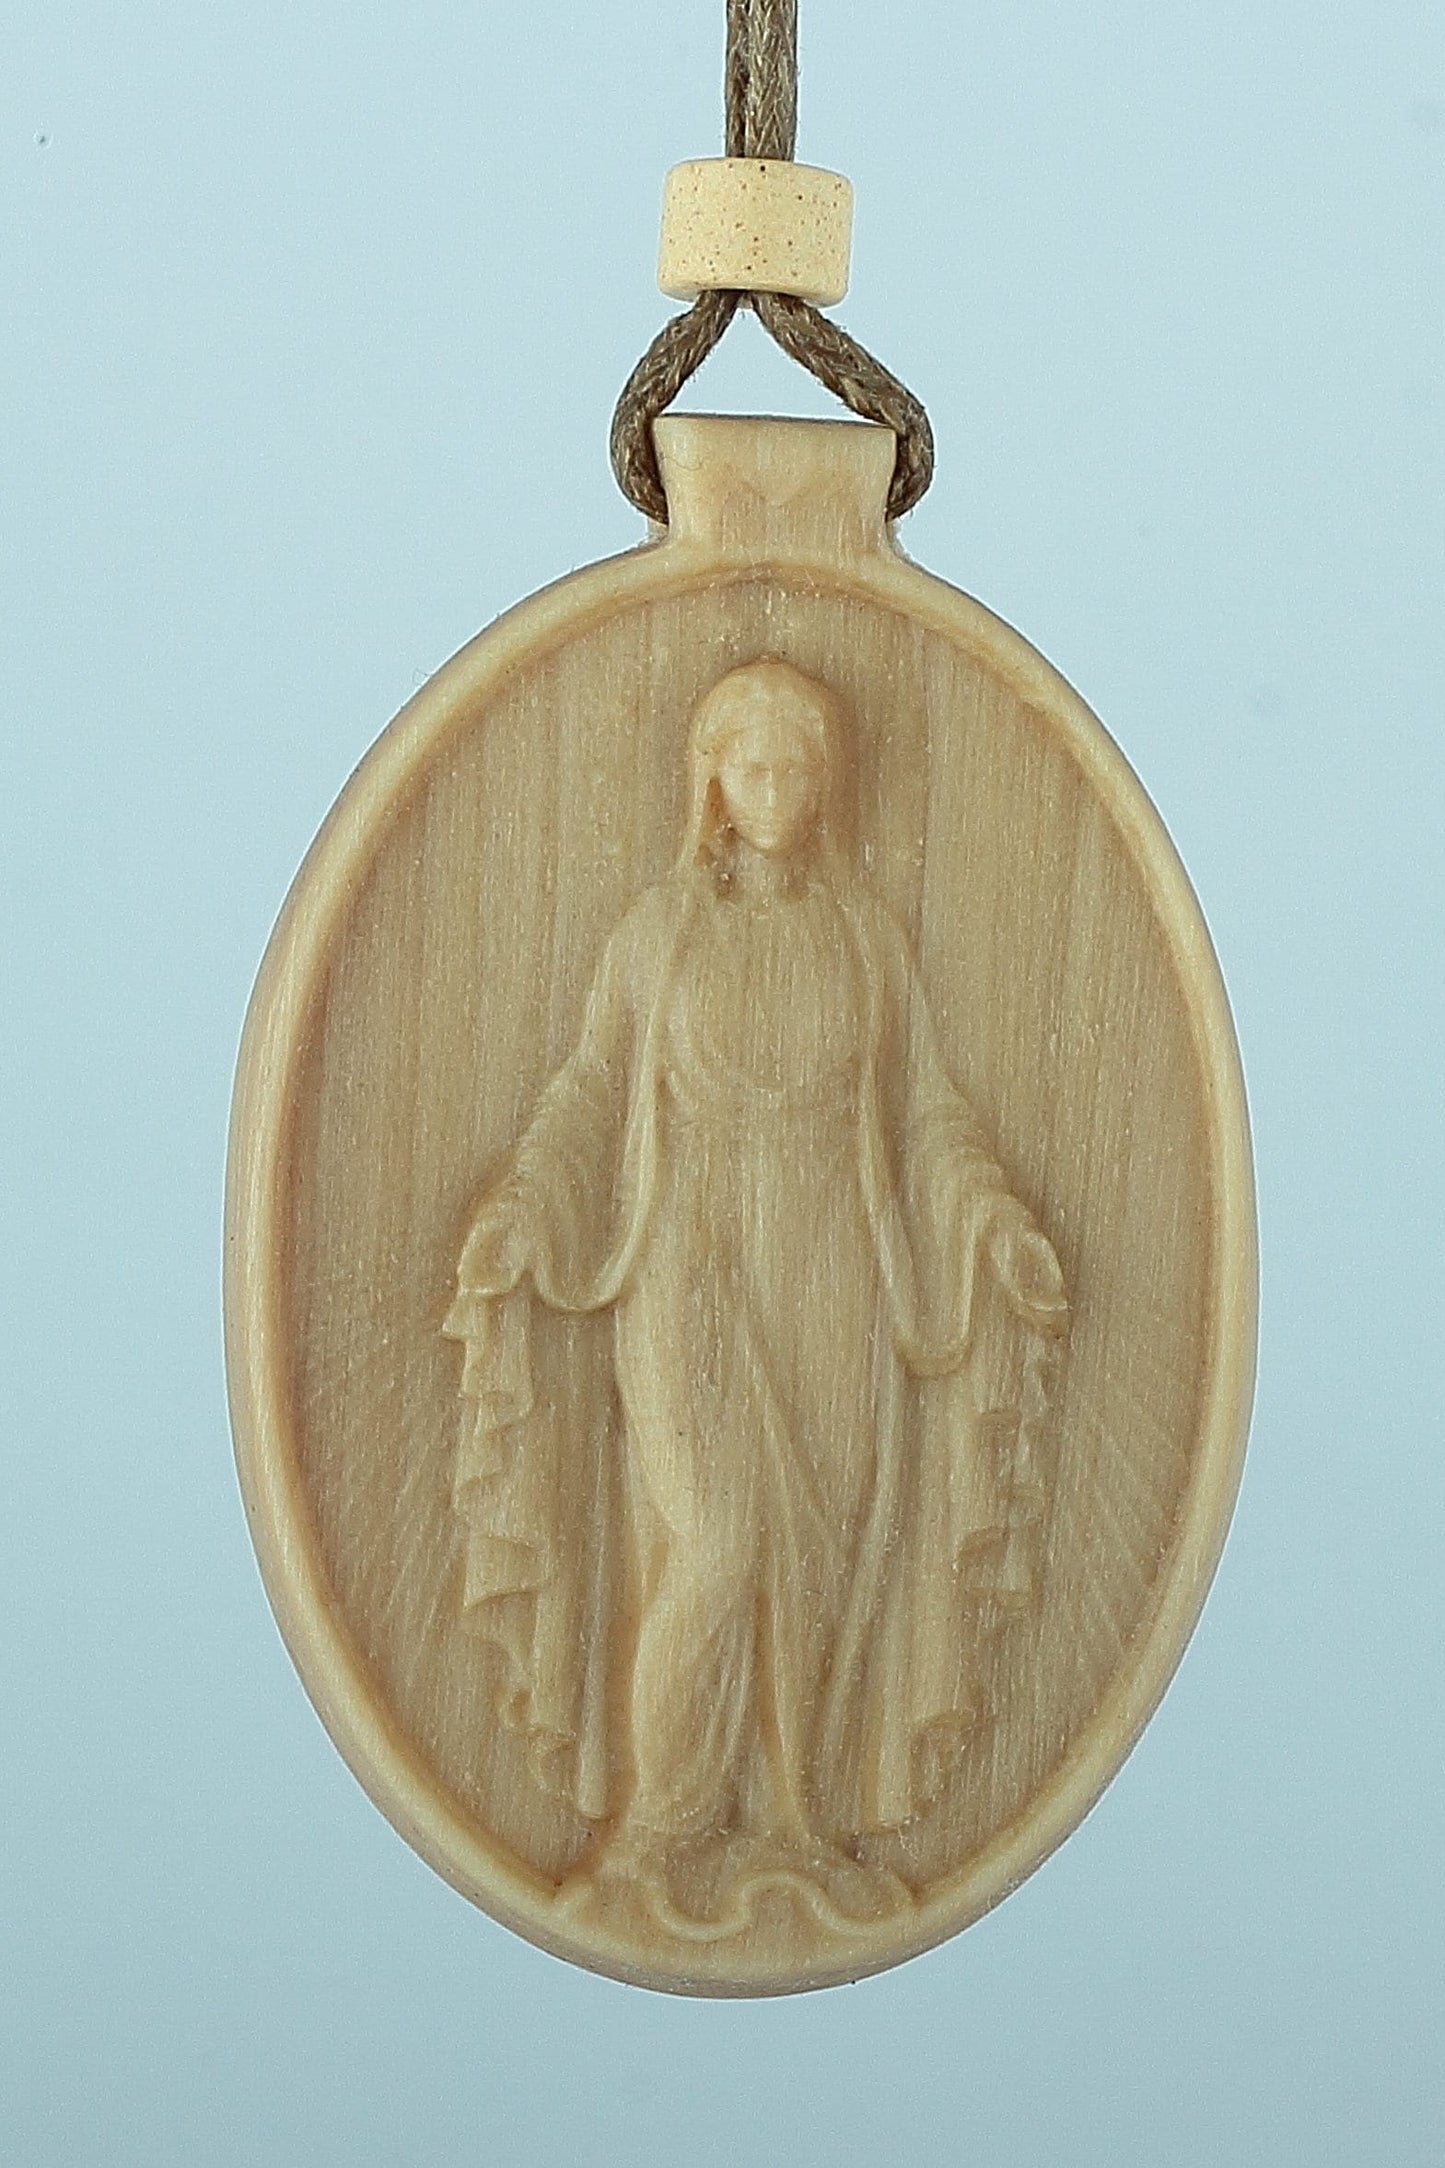 Virgin Mary necklace Virgin Mary pendant St Mary necklace wood necklace